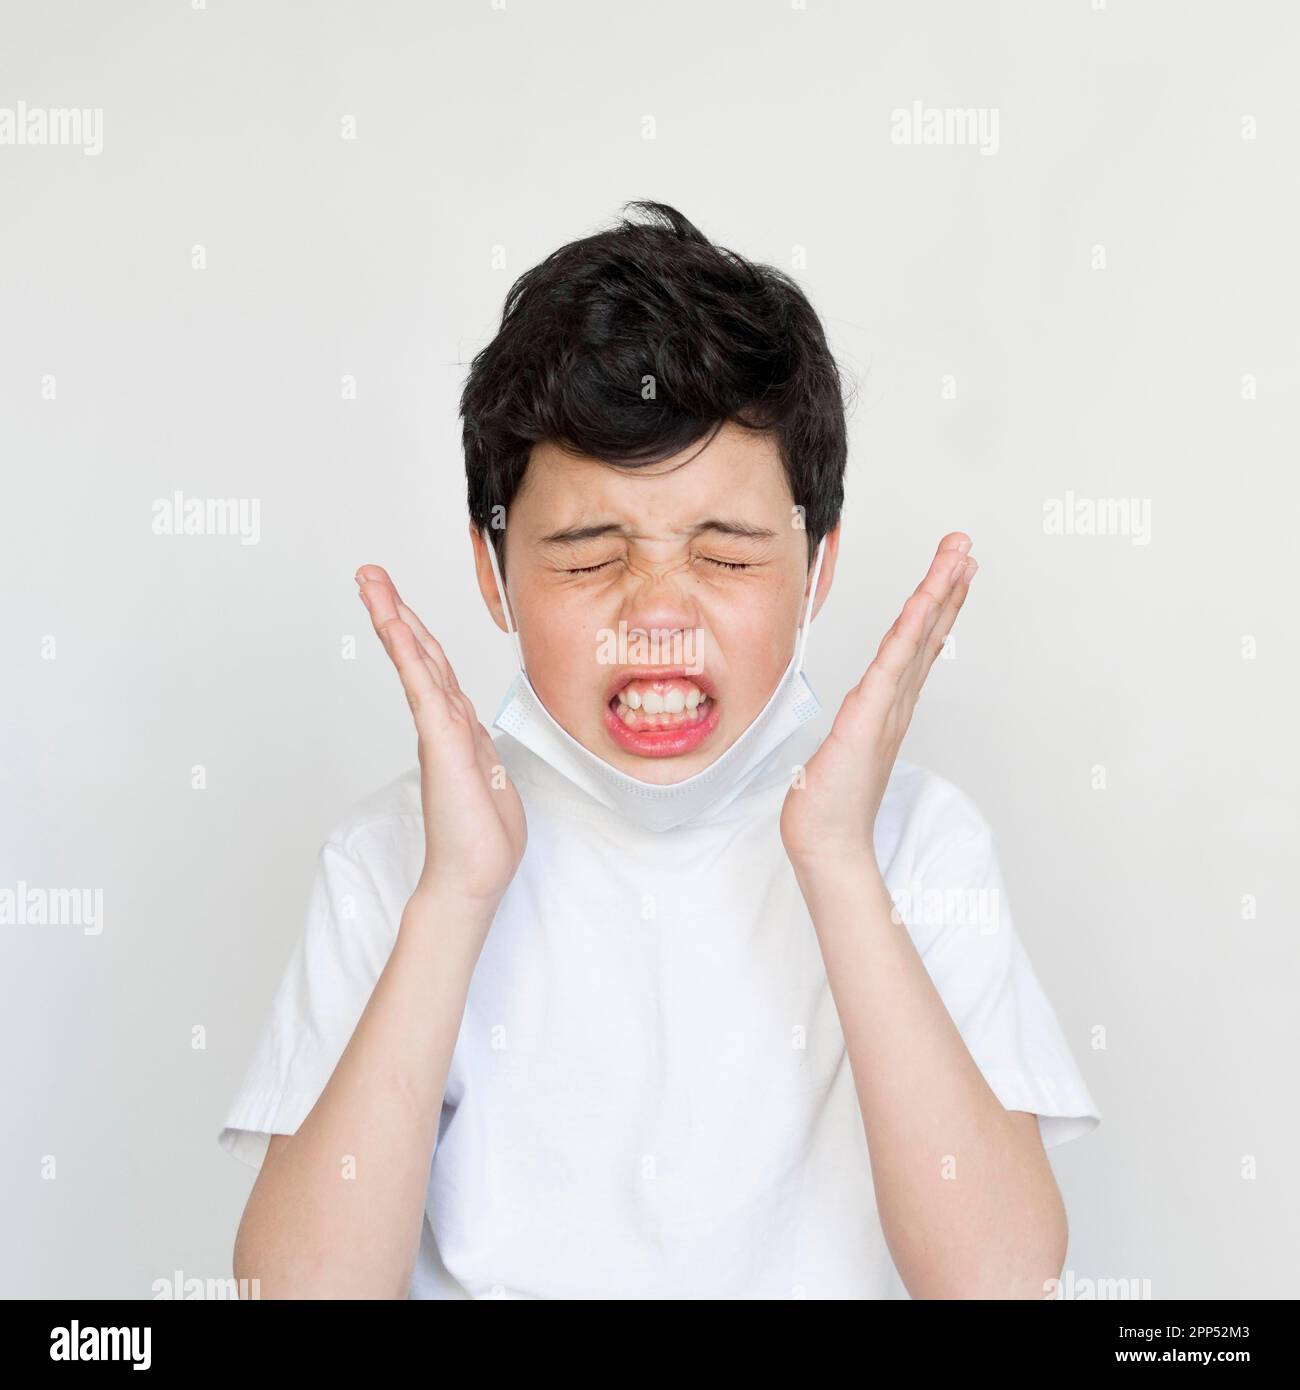 Front view young boy sneezing Stock Photo